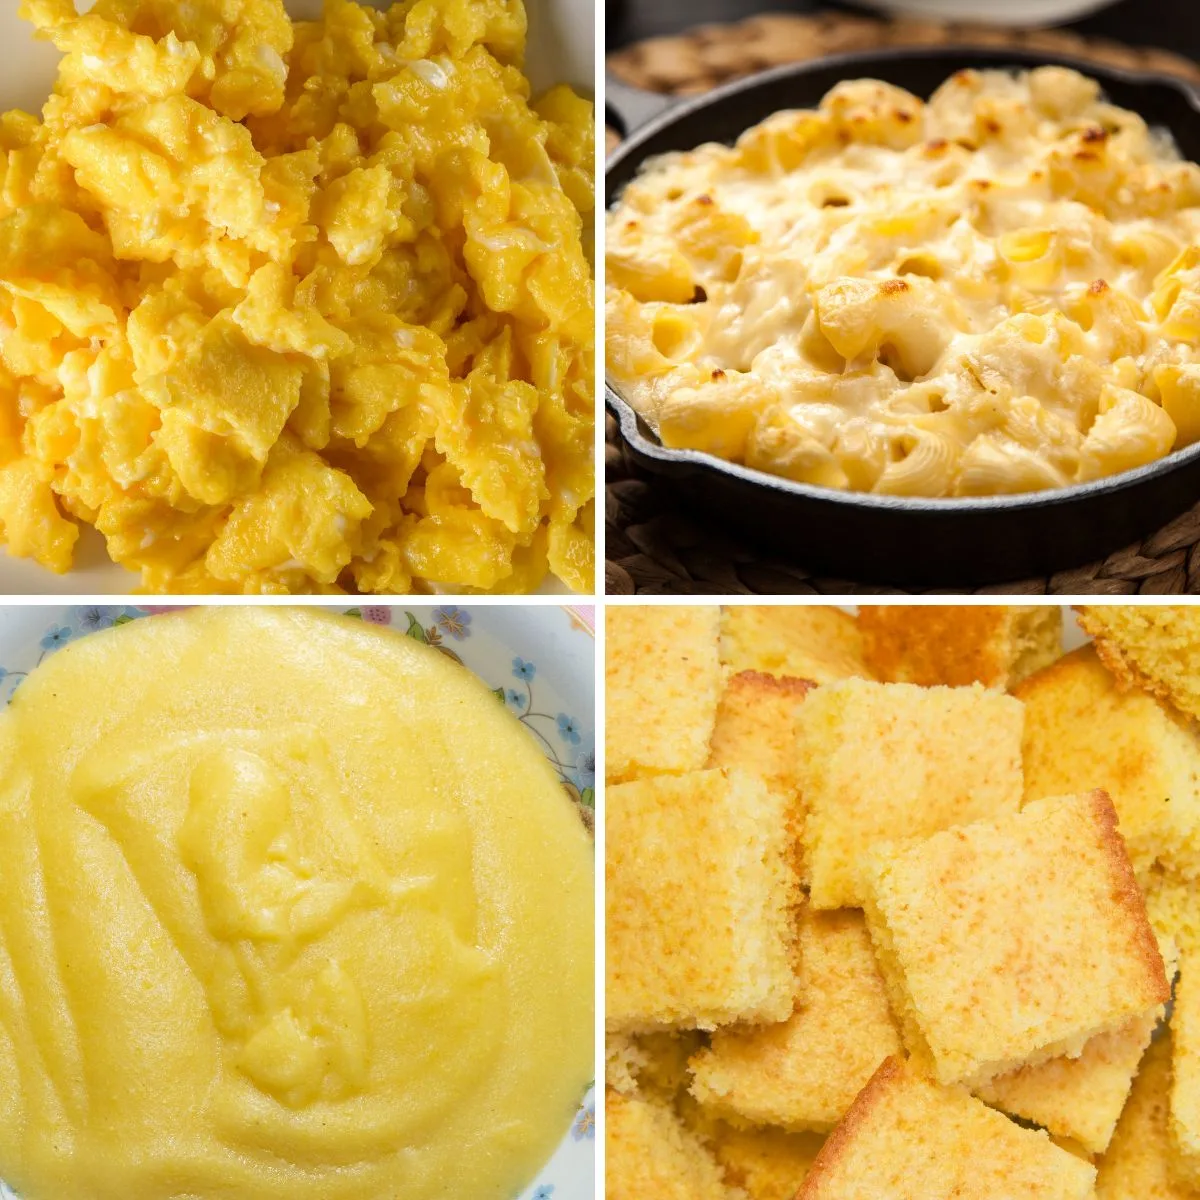 Collage of 4 yellow foods